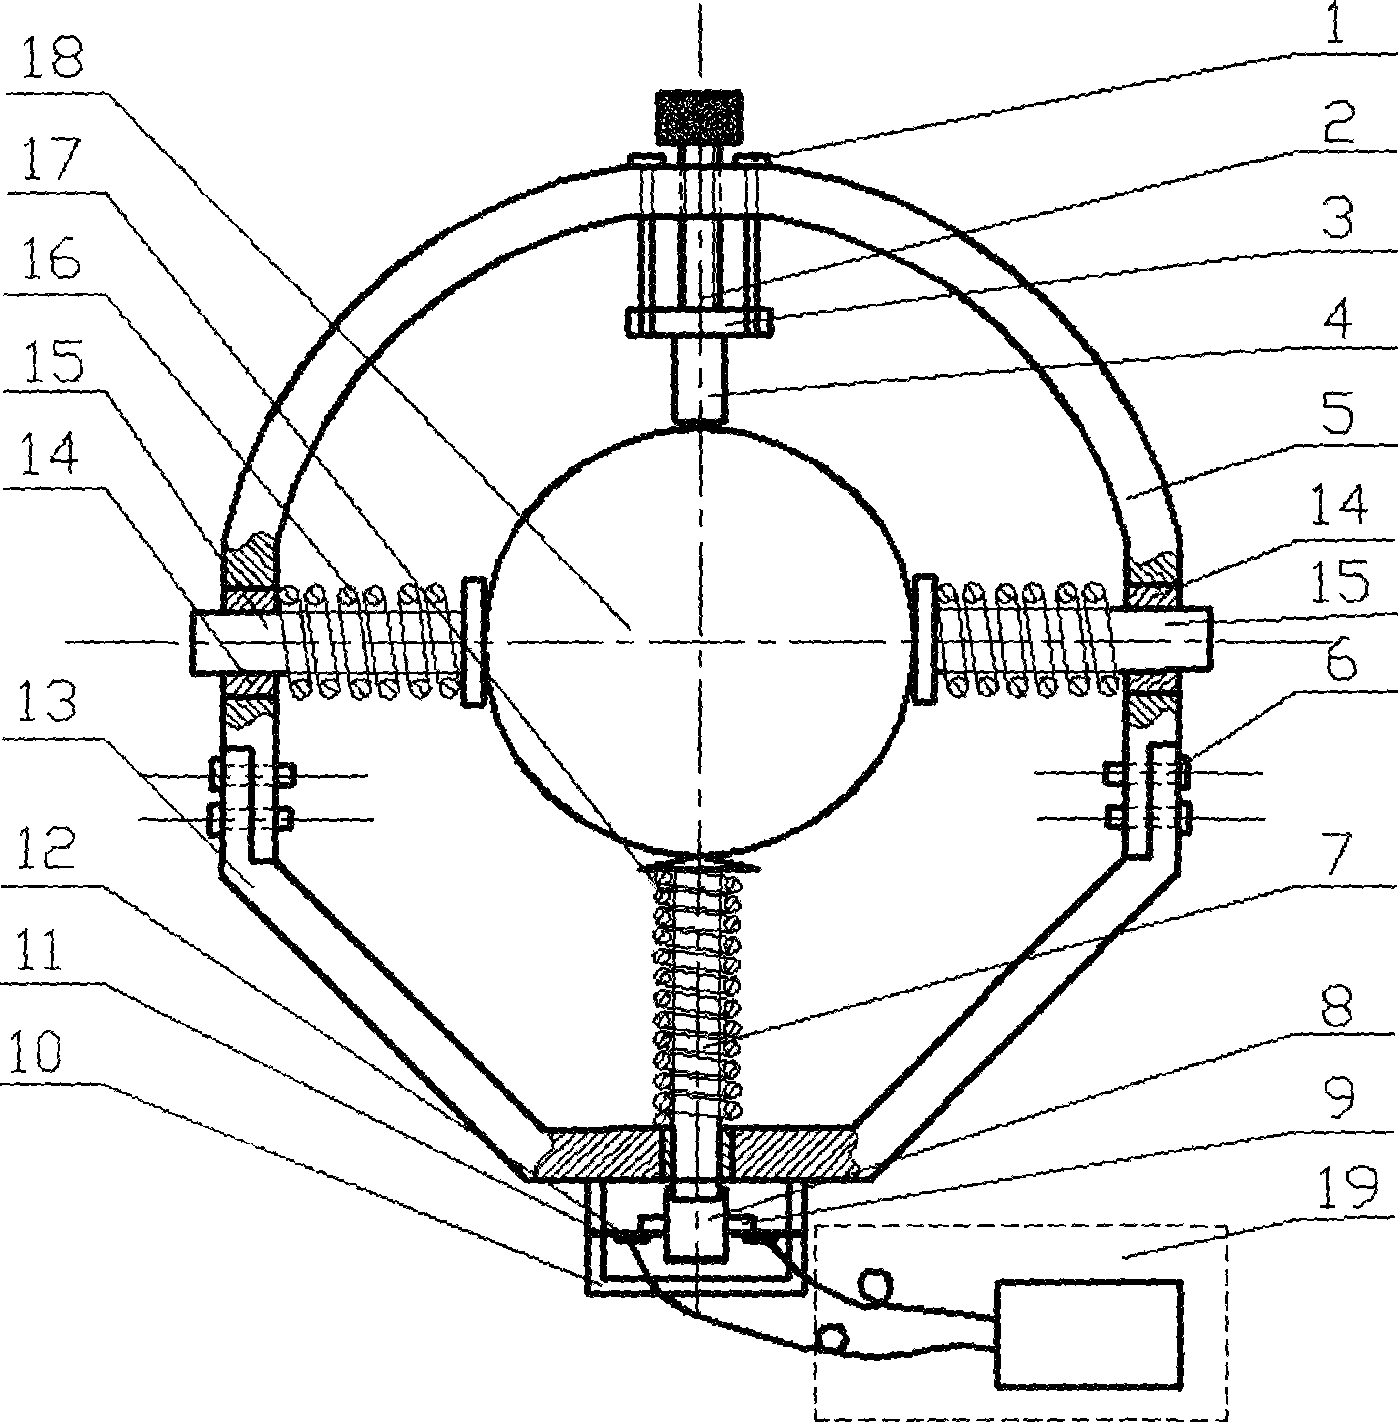 High-temperature pipe fitting radial deformation sensing device